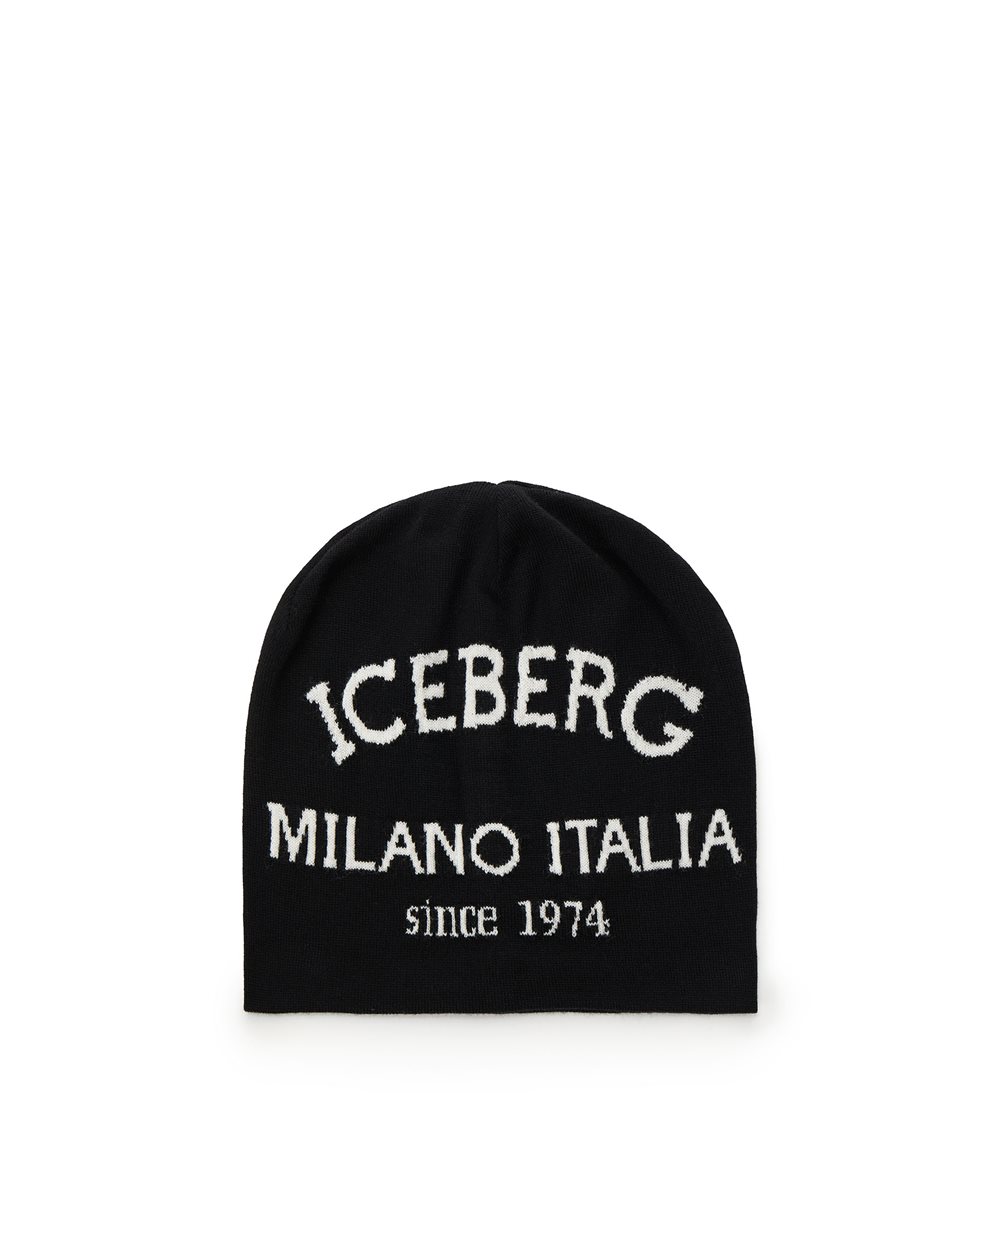 Wool beanie with logo -  ( PRIMO STEP DE ) PROMO SALDI UP TO 30% | Iceberg - Official Website